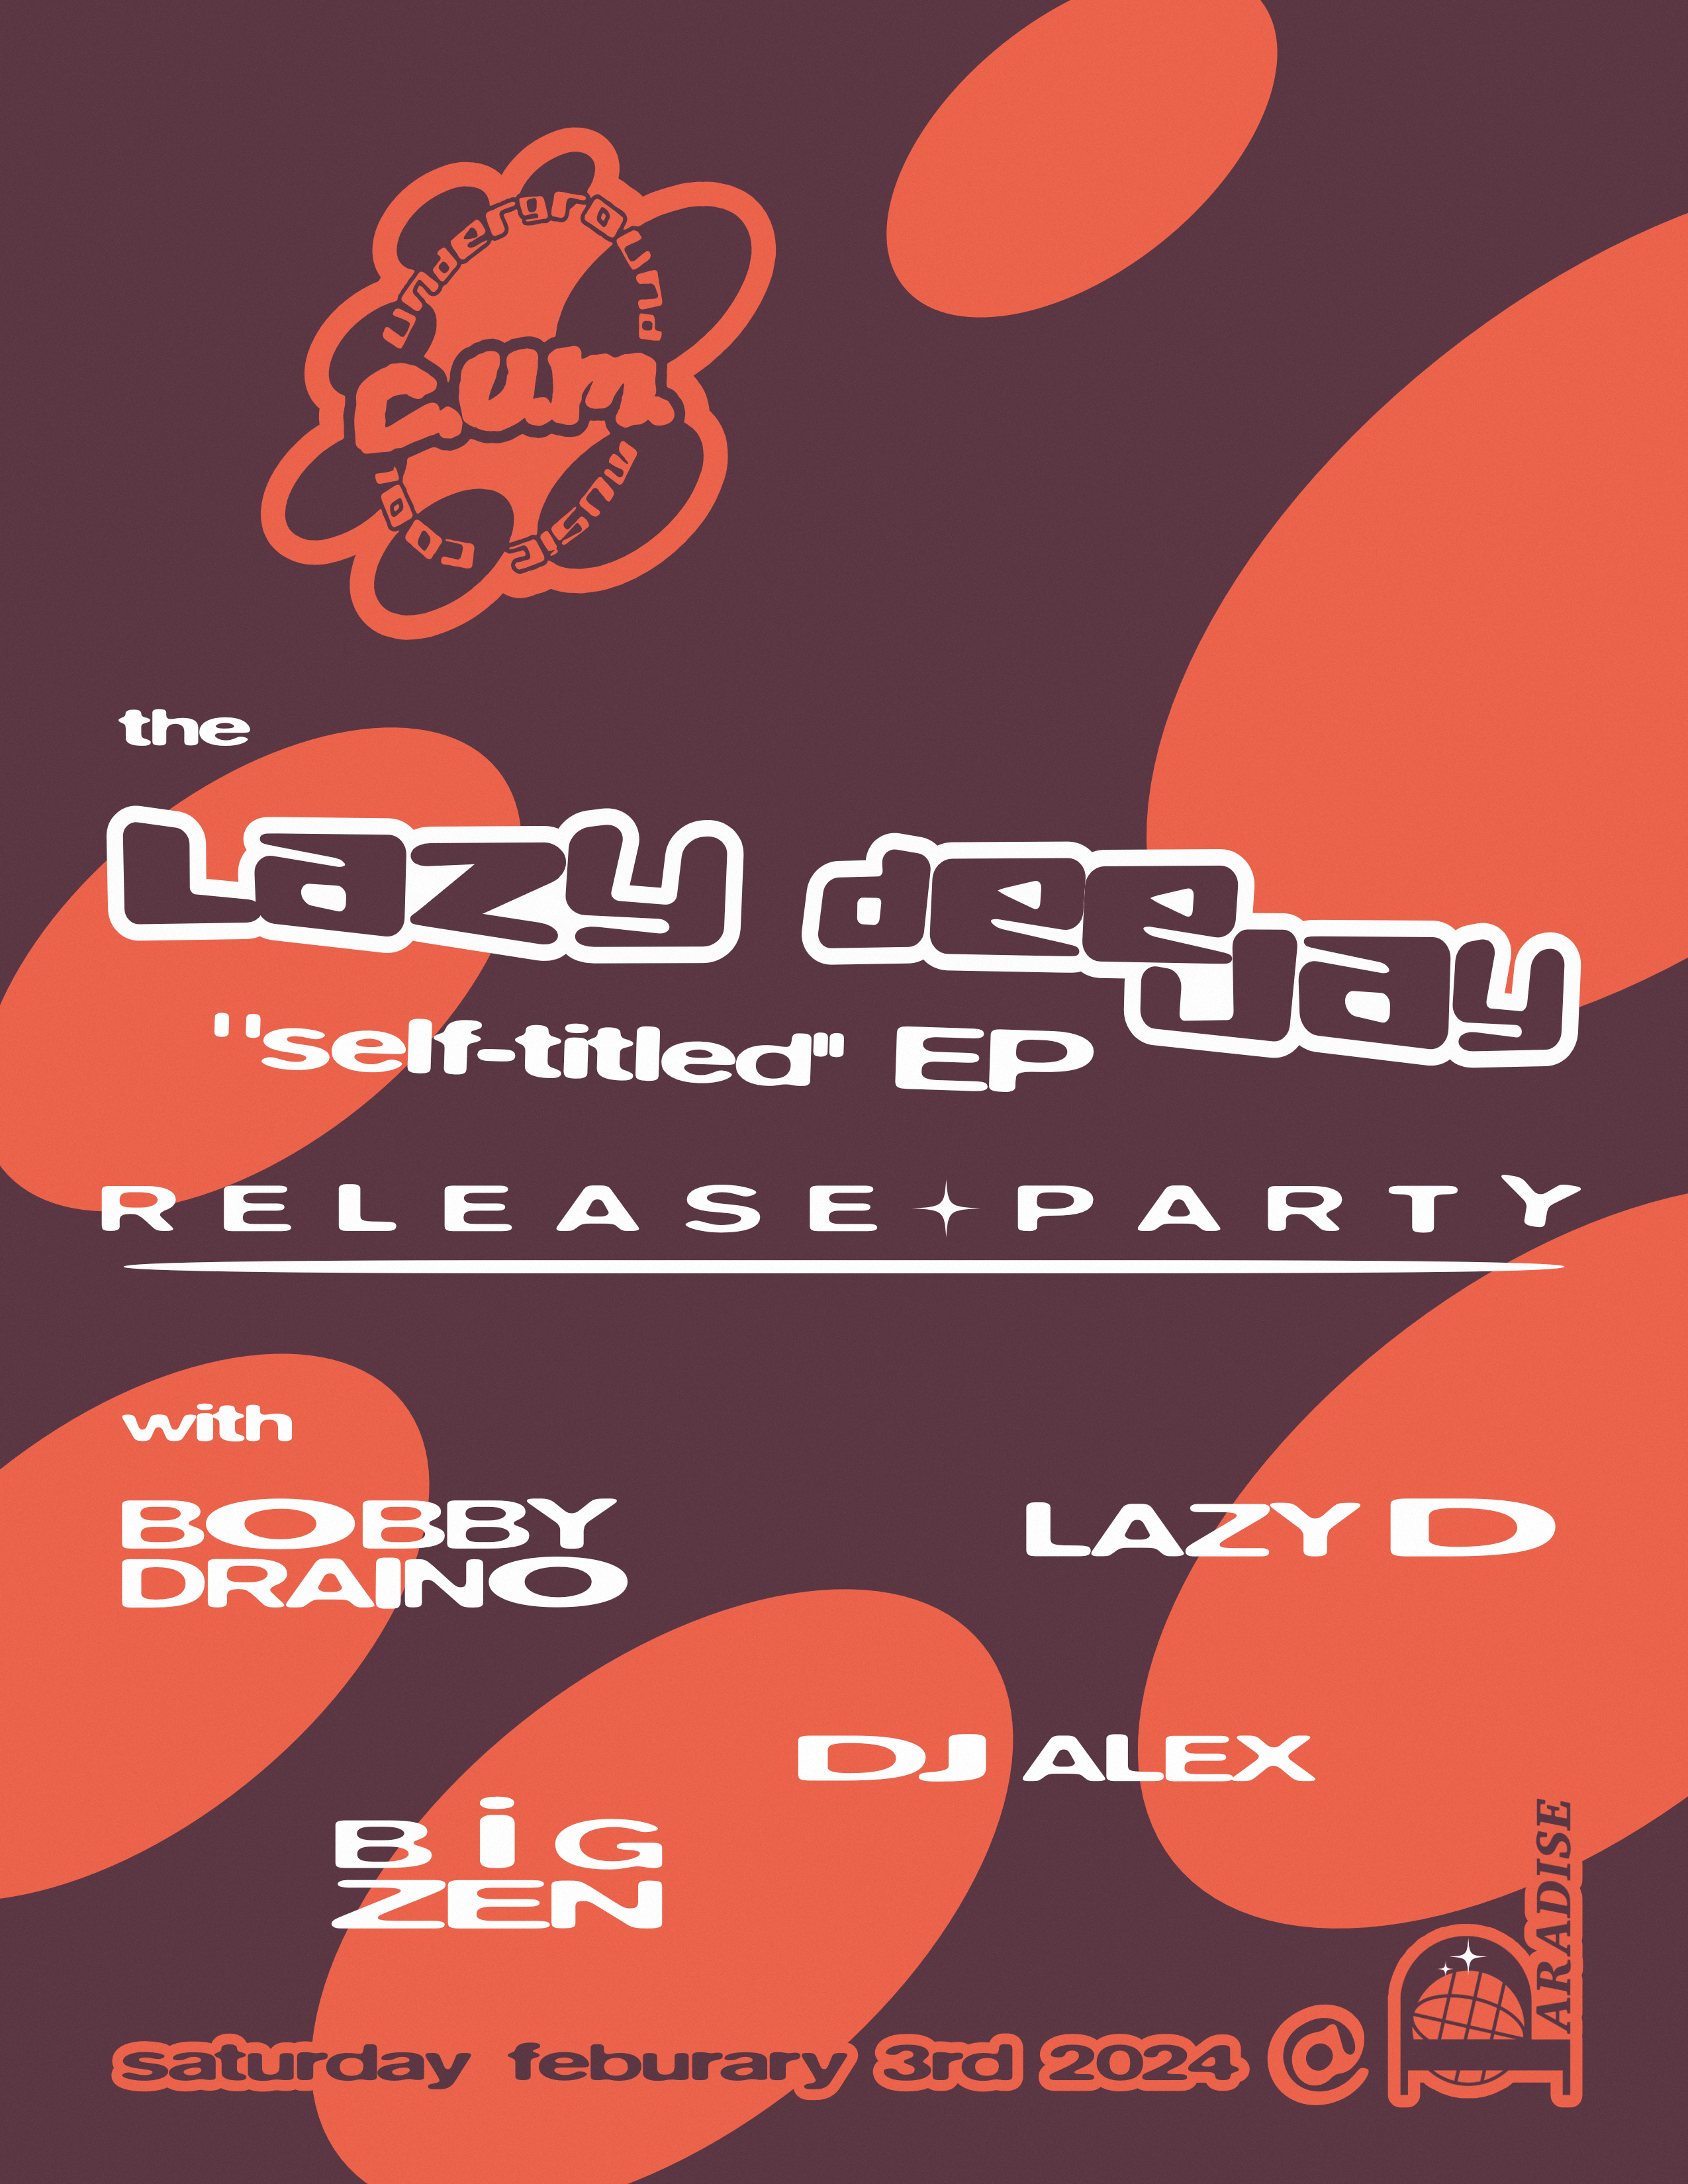 Cool Underground Music Release Party feat. Big Zen, Lazy Deejay, Bobby Draino & Deejay Alex - フライヤー表